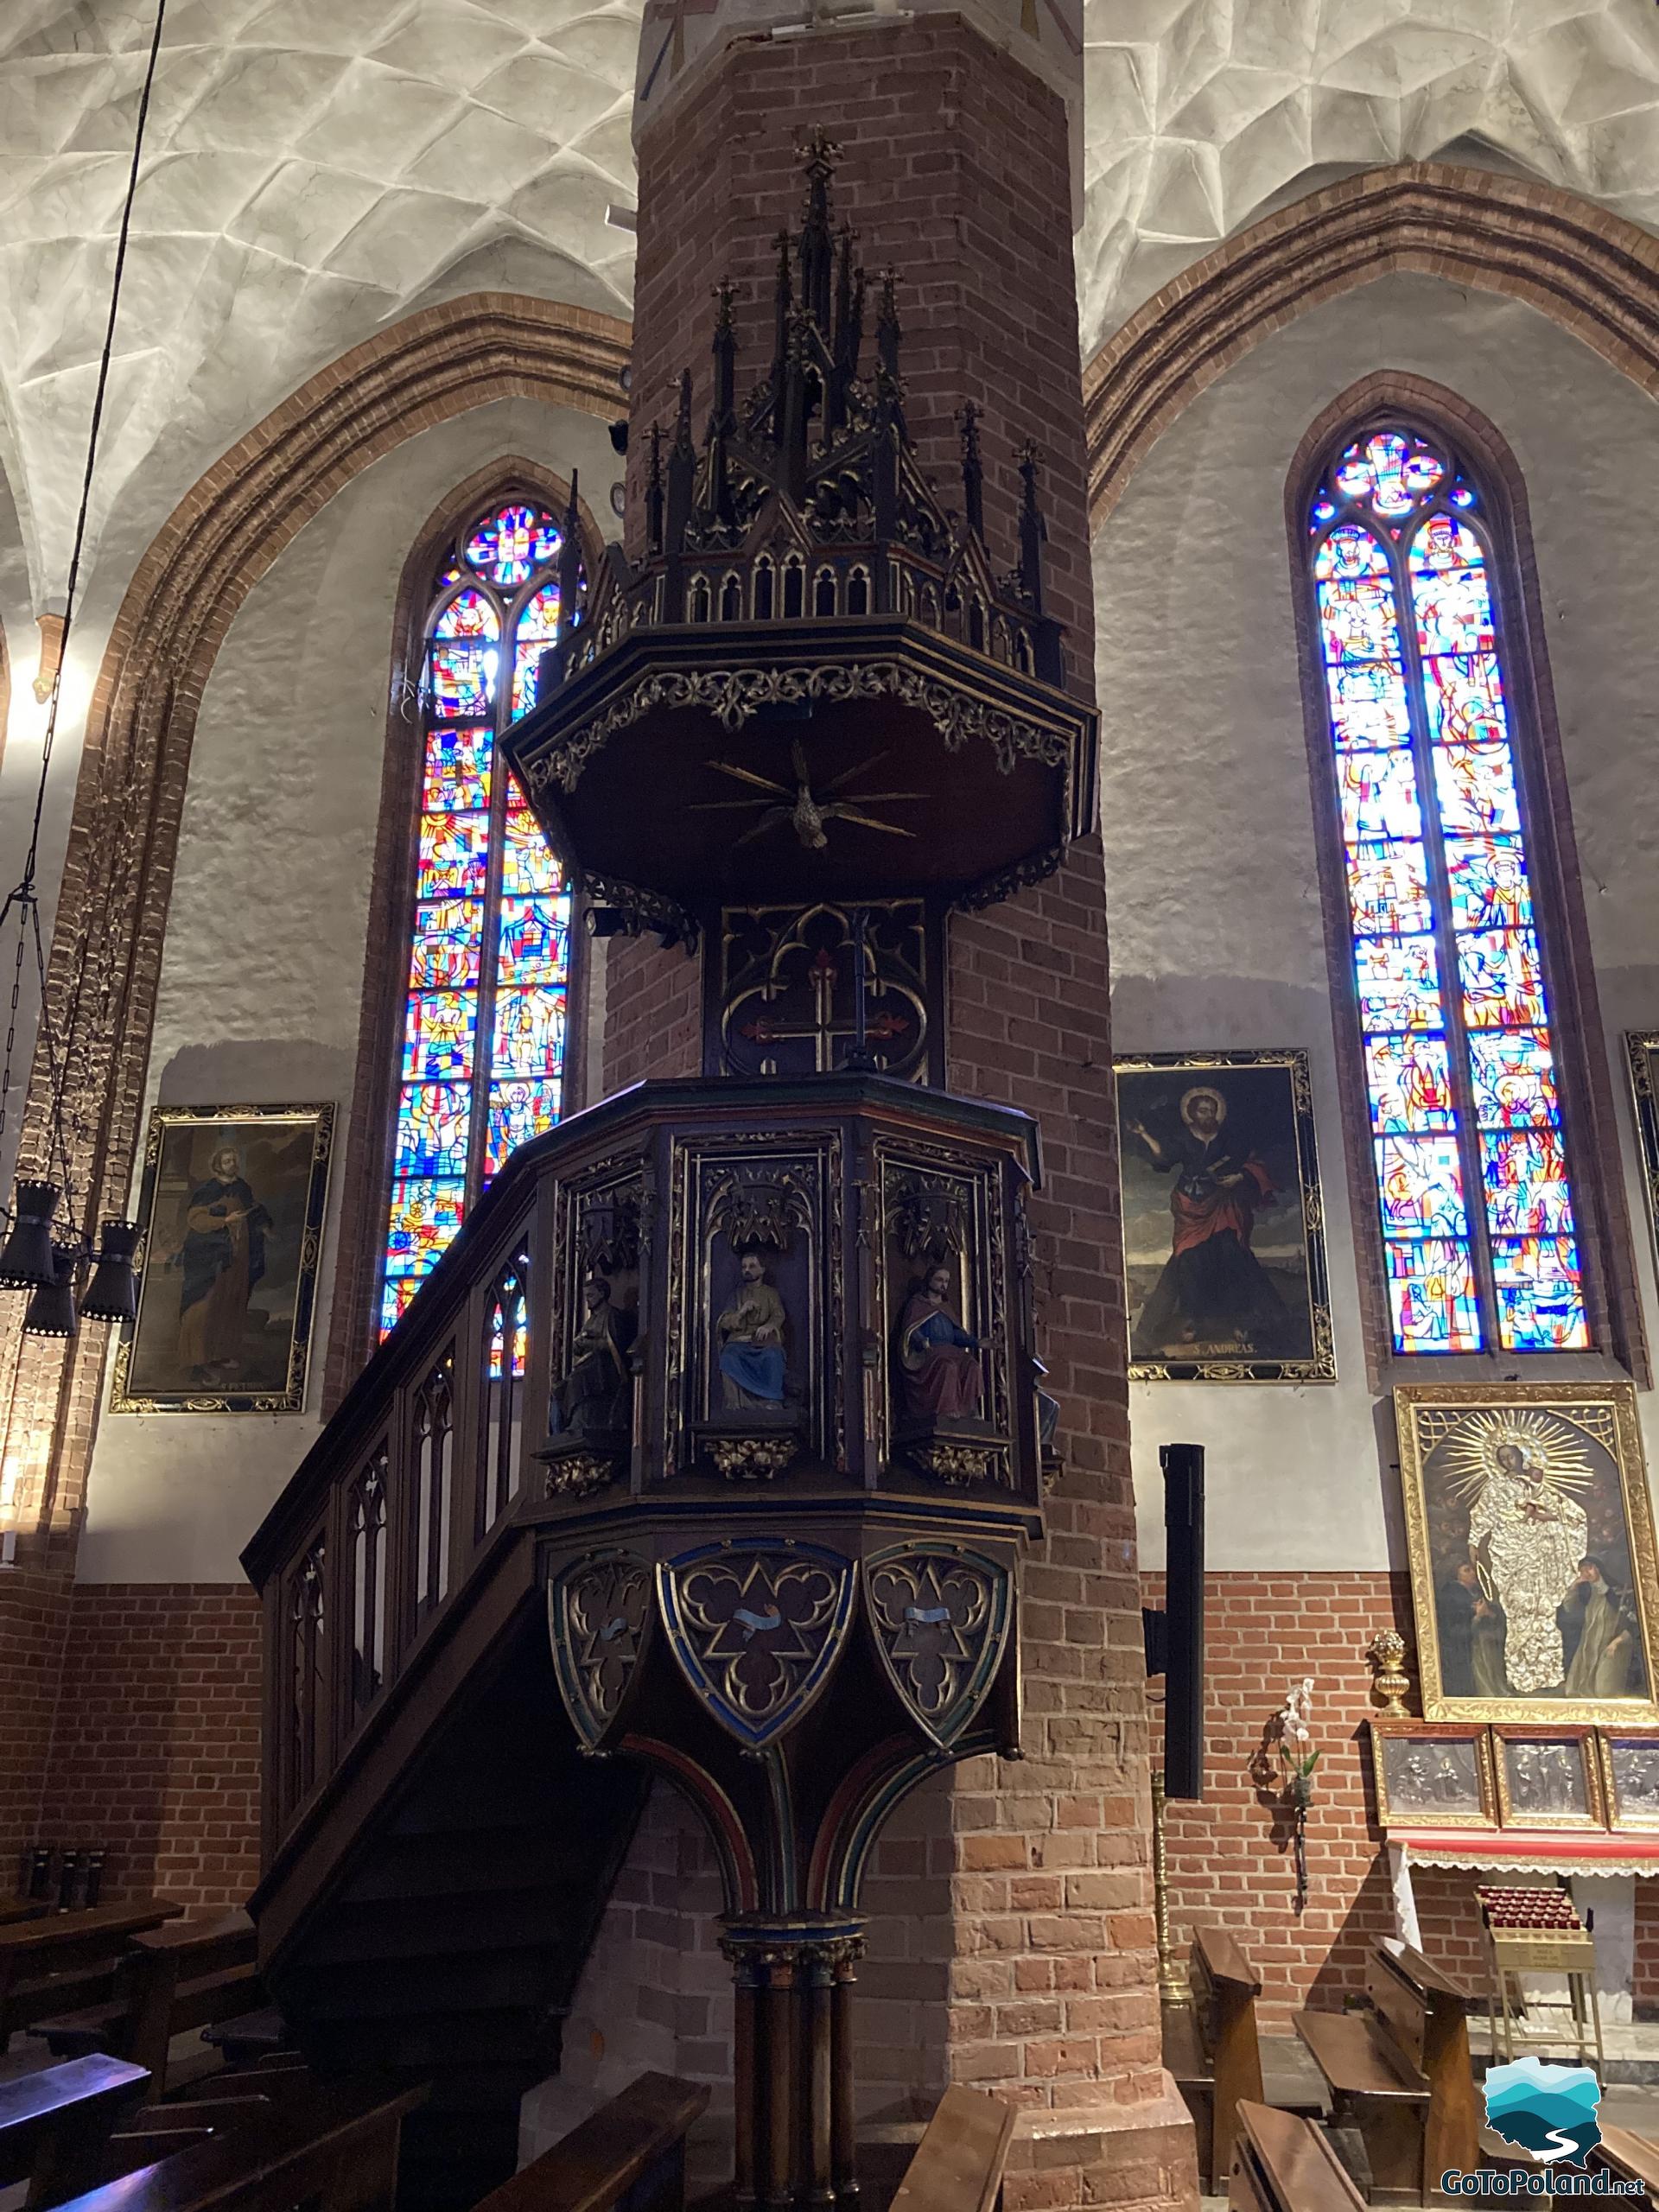 a wooden pulpit in the cathedral